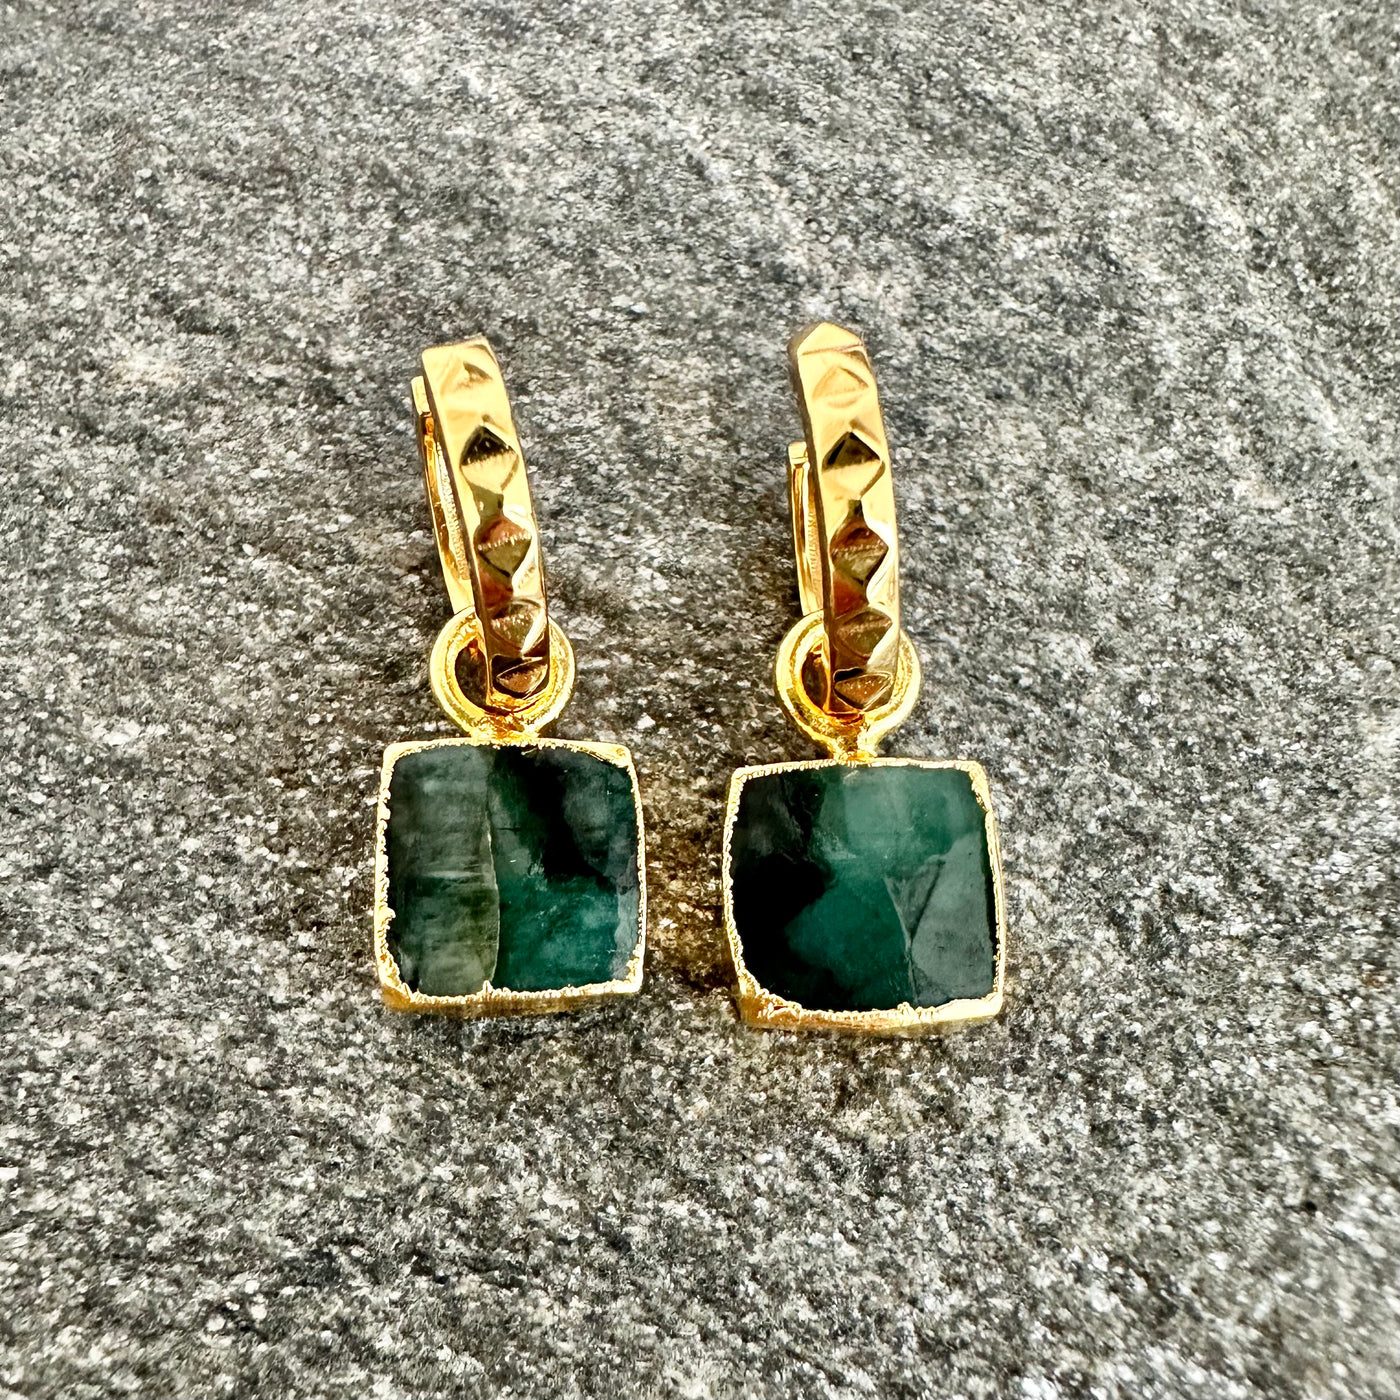 The Square Emerald gold hoop earrings